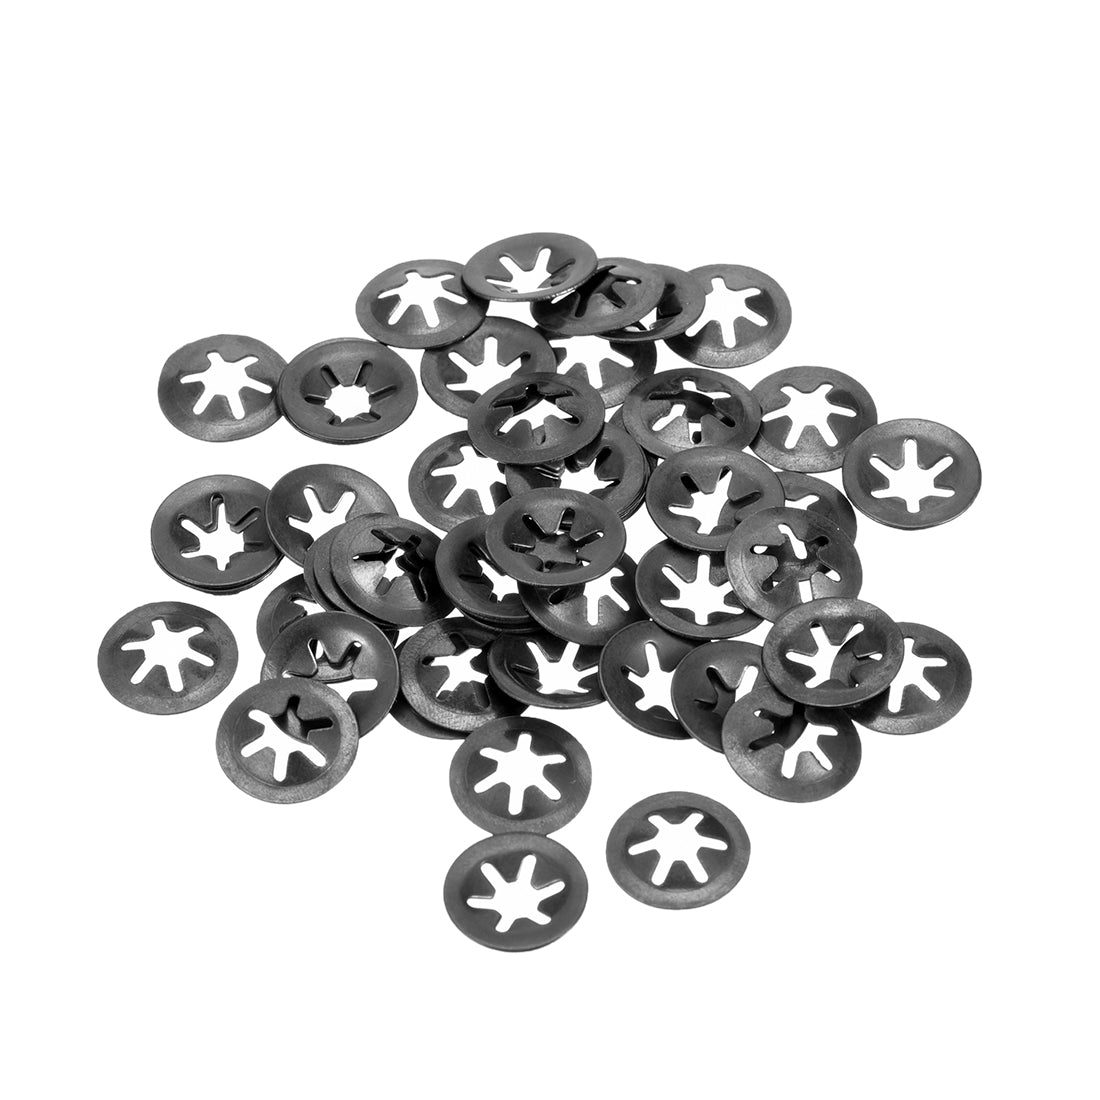 Uxcell Uxcell M4 Internal Tooth Star Locking Washer 3.5mm I.D. 12mm O.D. Lock Washers Push On Locking Speed Clip, 65Mn Black Oxide Finish 50pcs